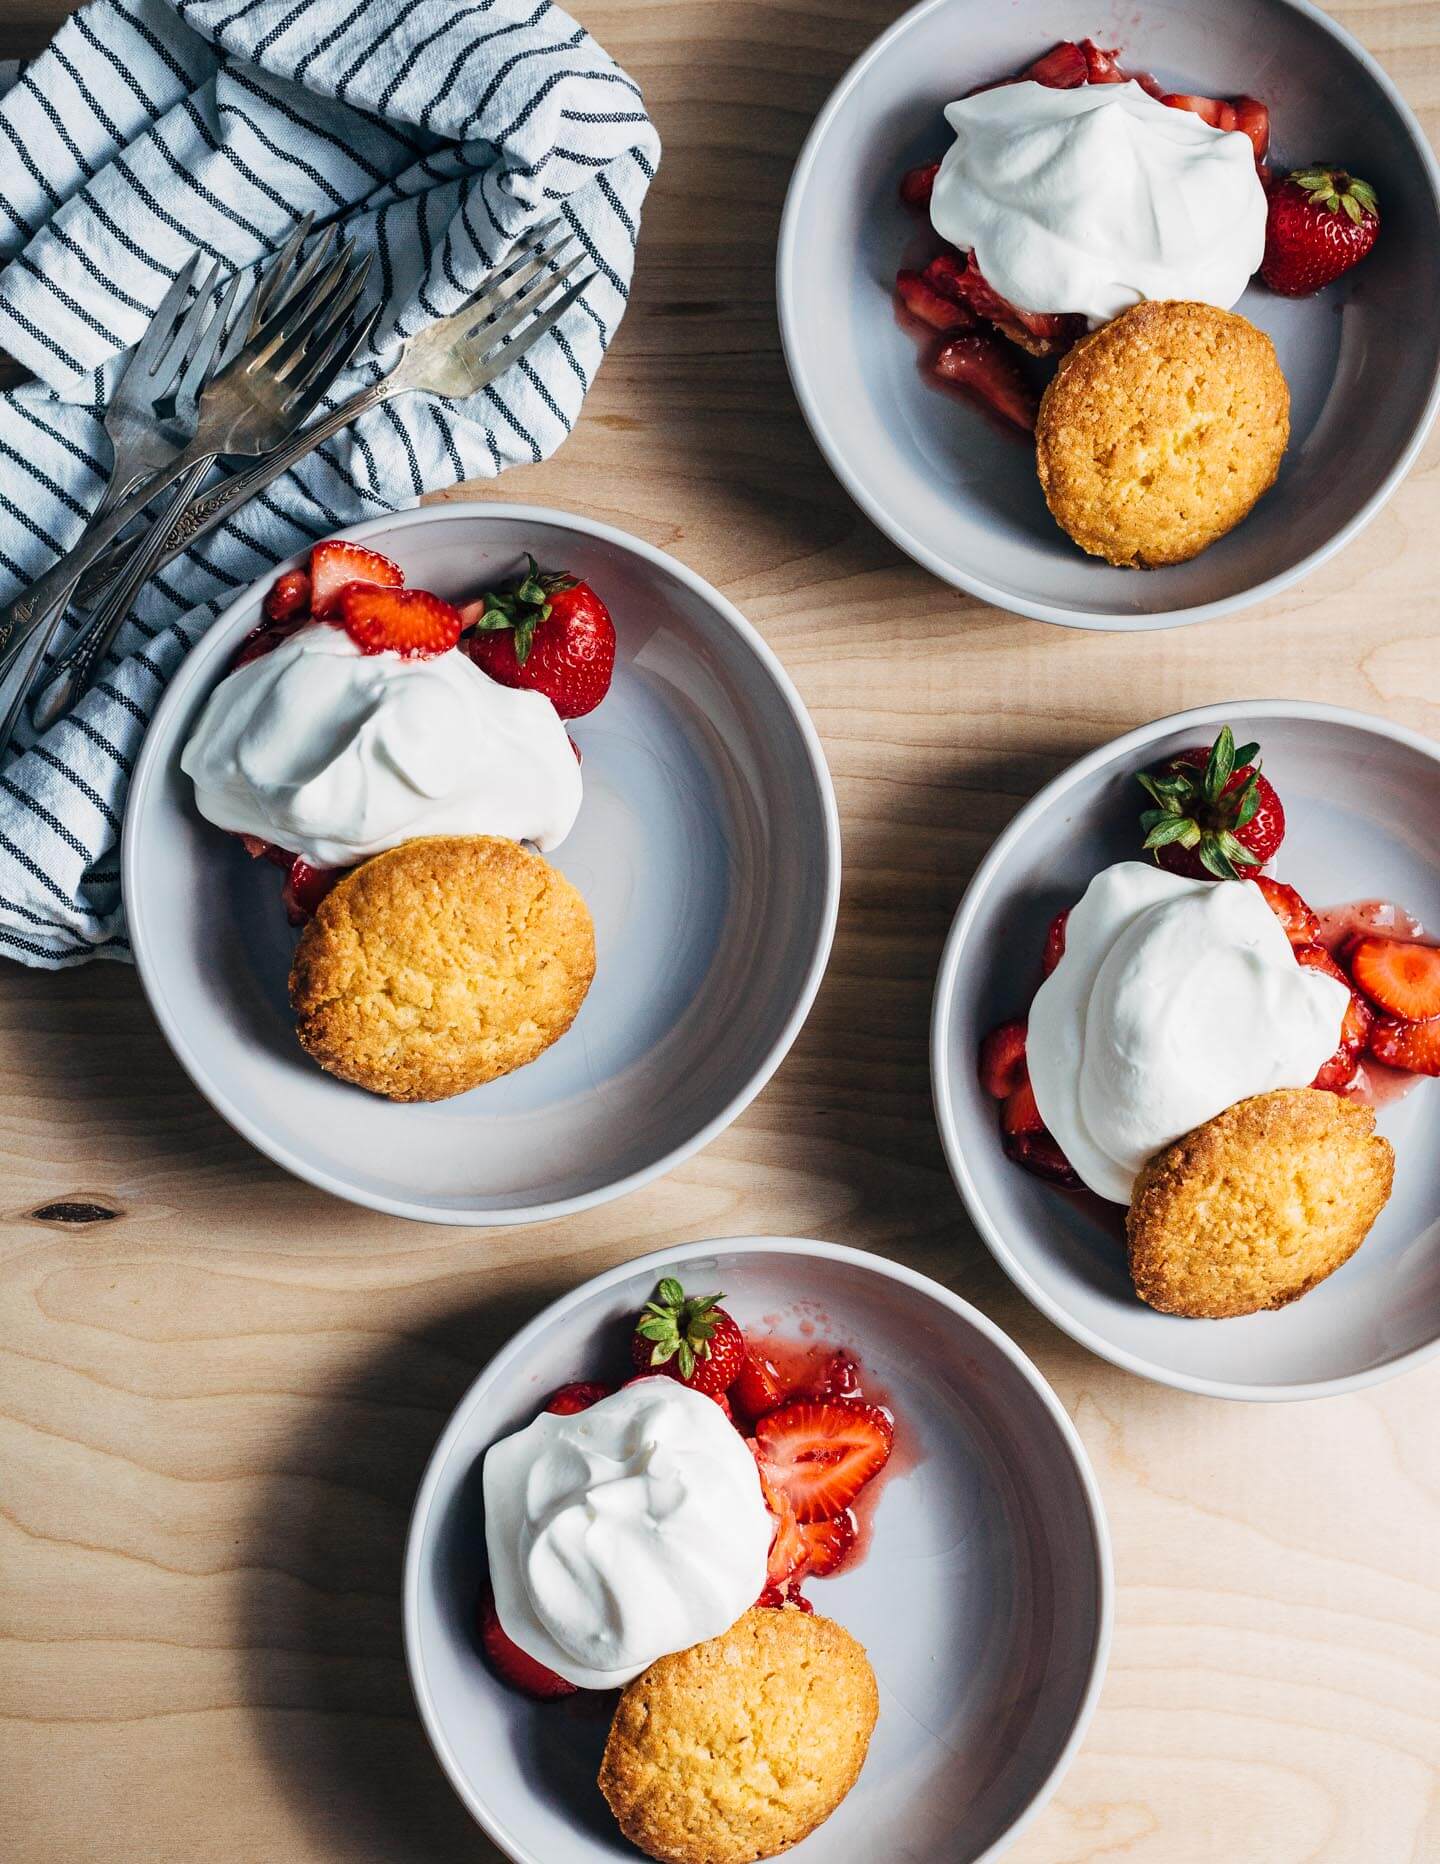 Semolina flour gives these semolina strawberry shortcakes a beautiful golden crust and a toothsome texture that pairs perfectly with ripe strawberries and whipped cream. 